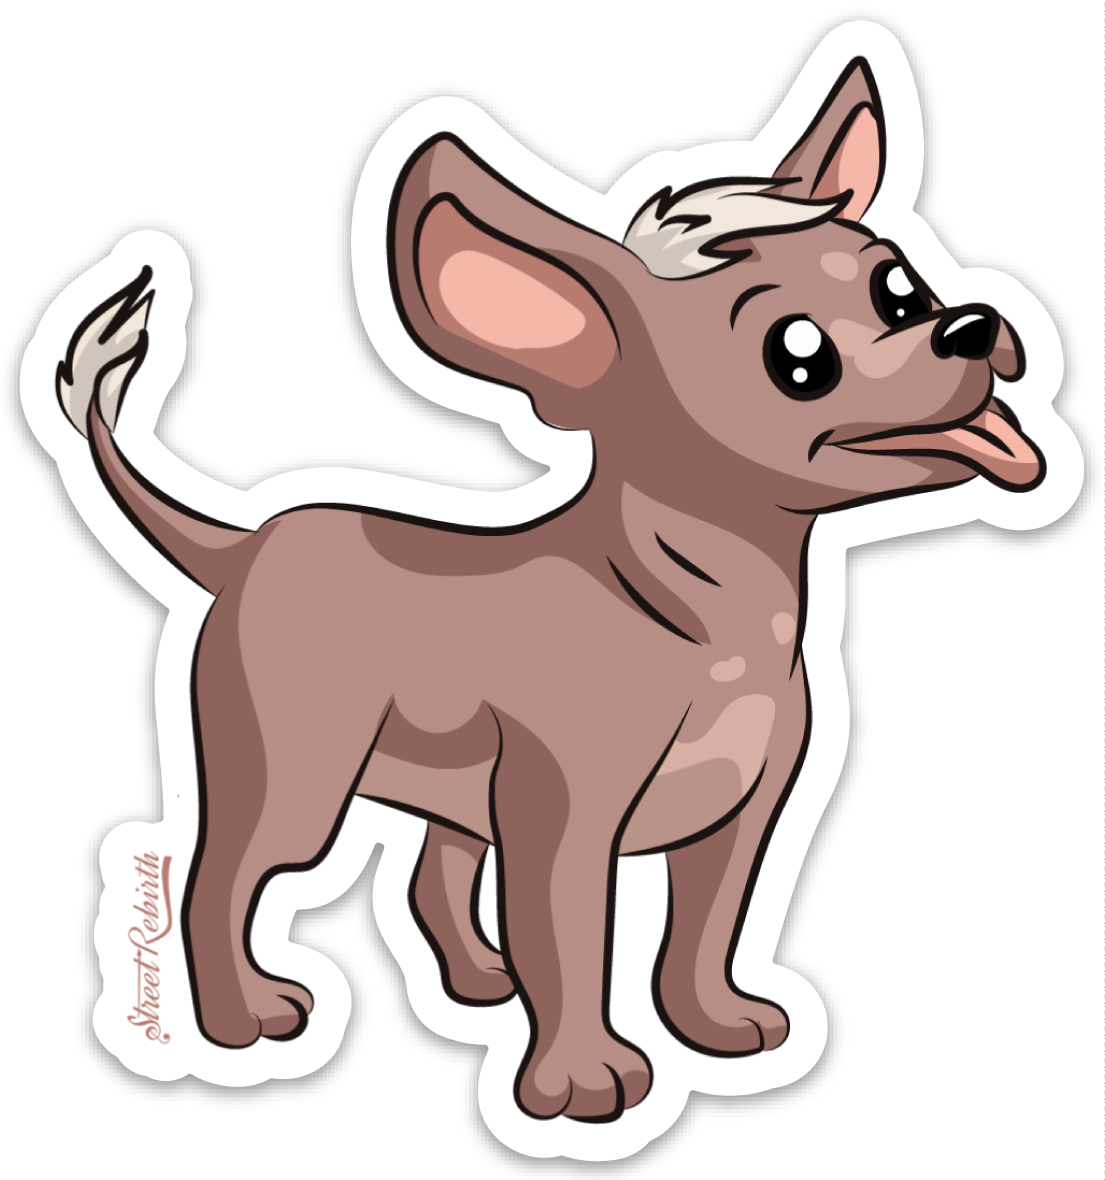 Xoloitzcuintli Dog PUN STICKER – ONE 4 INCH WATER PROOF VINYL STICKER – FOR HYDRO FLASK, SKATEBOARD, LAPTOP, PLANNER, CAR, COLLECTING, GIFTING